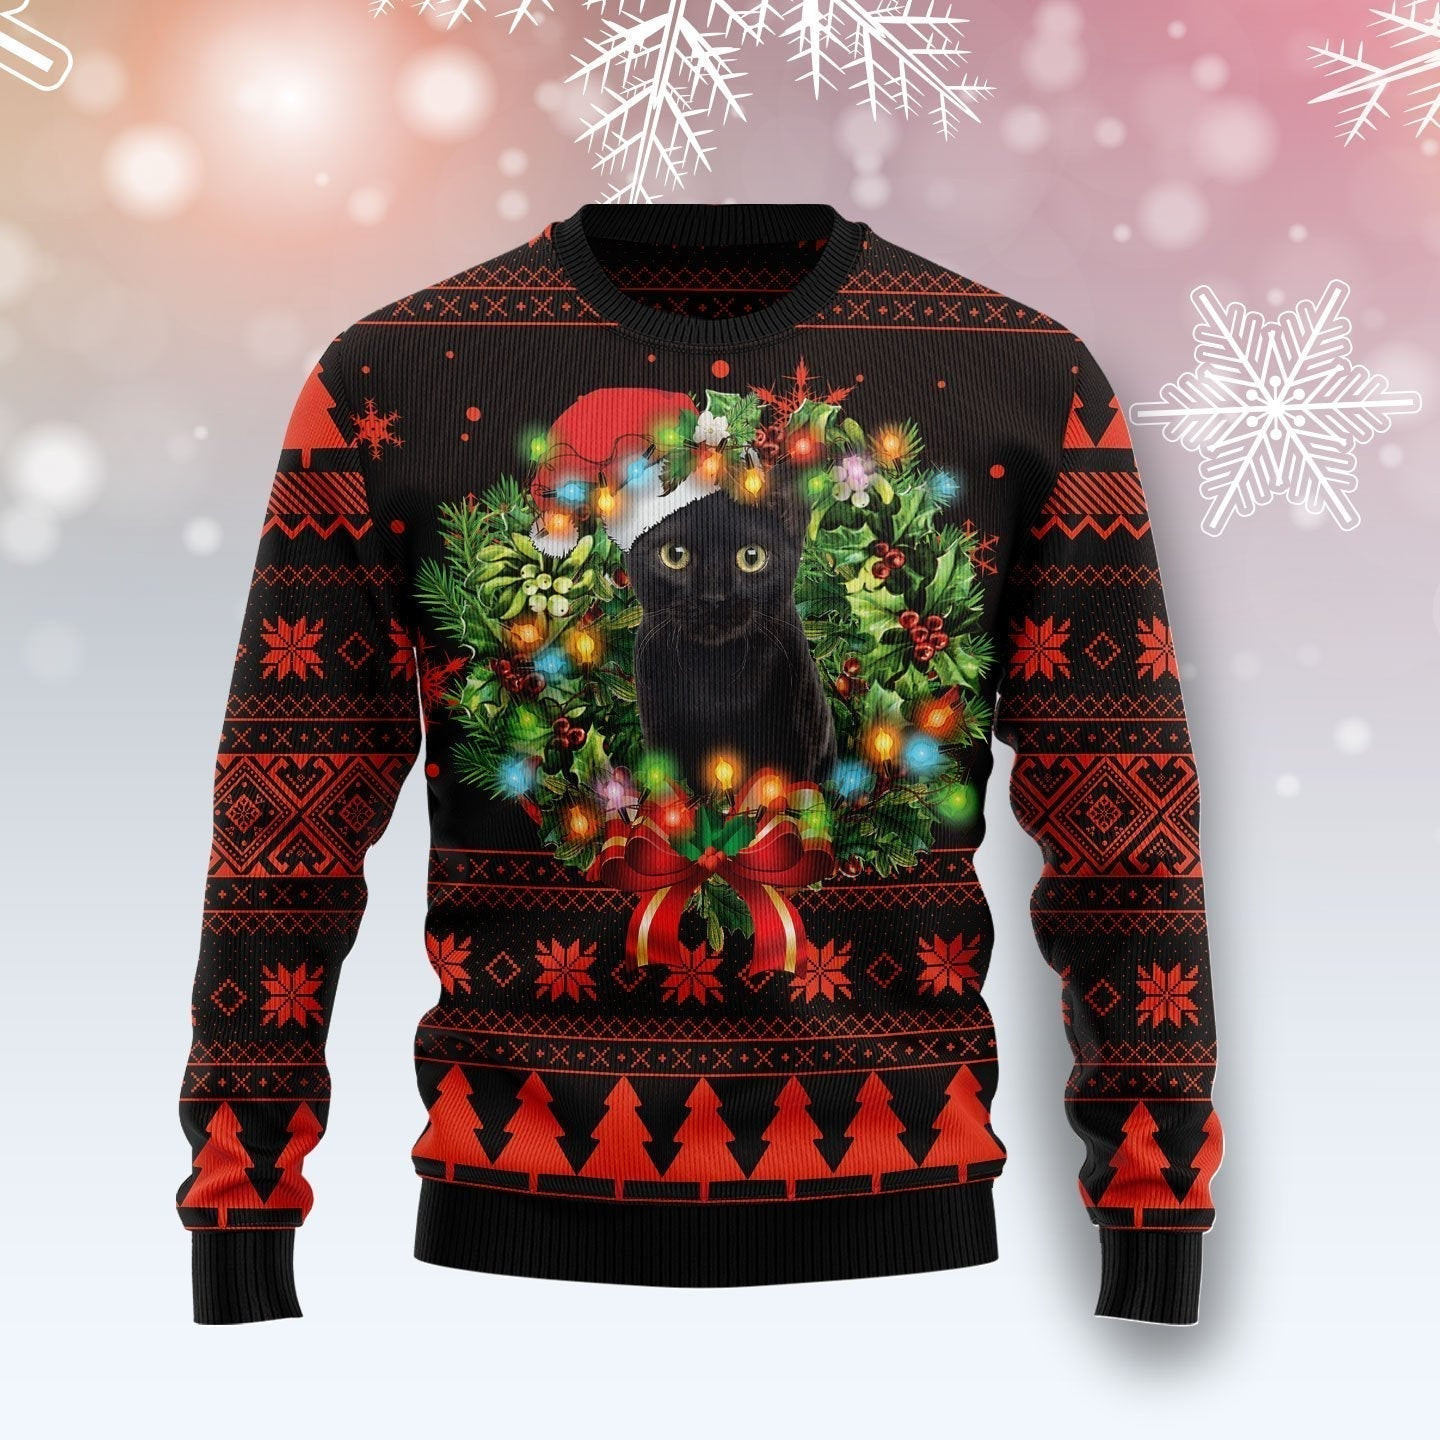 Cute Black Cat Ugly Christmas Sweater, Ugly Sweater For Men Women, Holiday Sweater